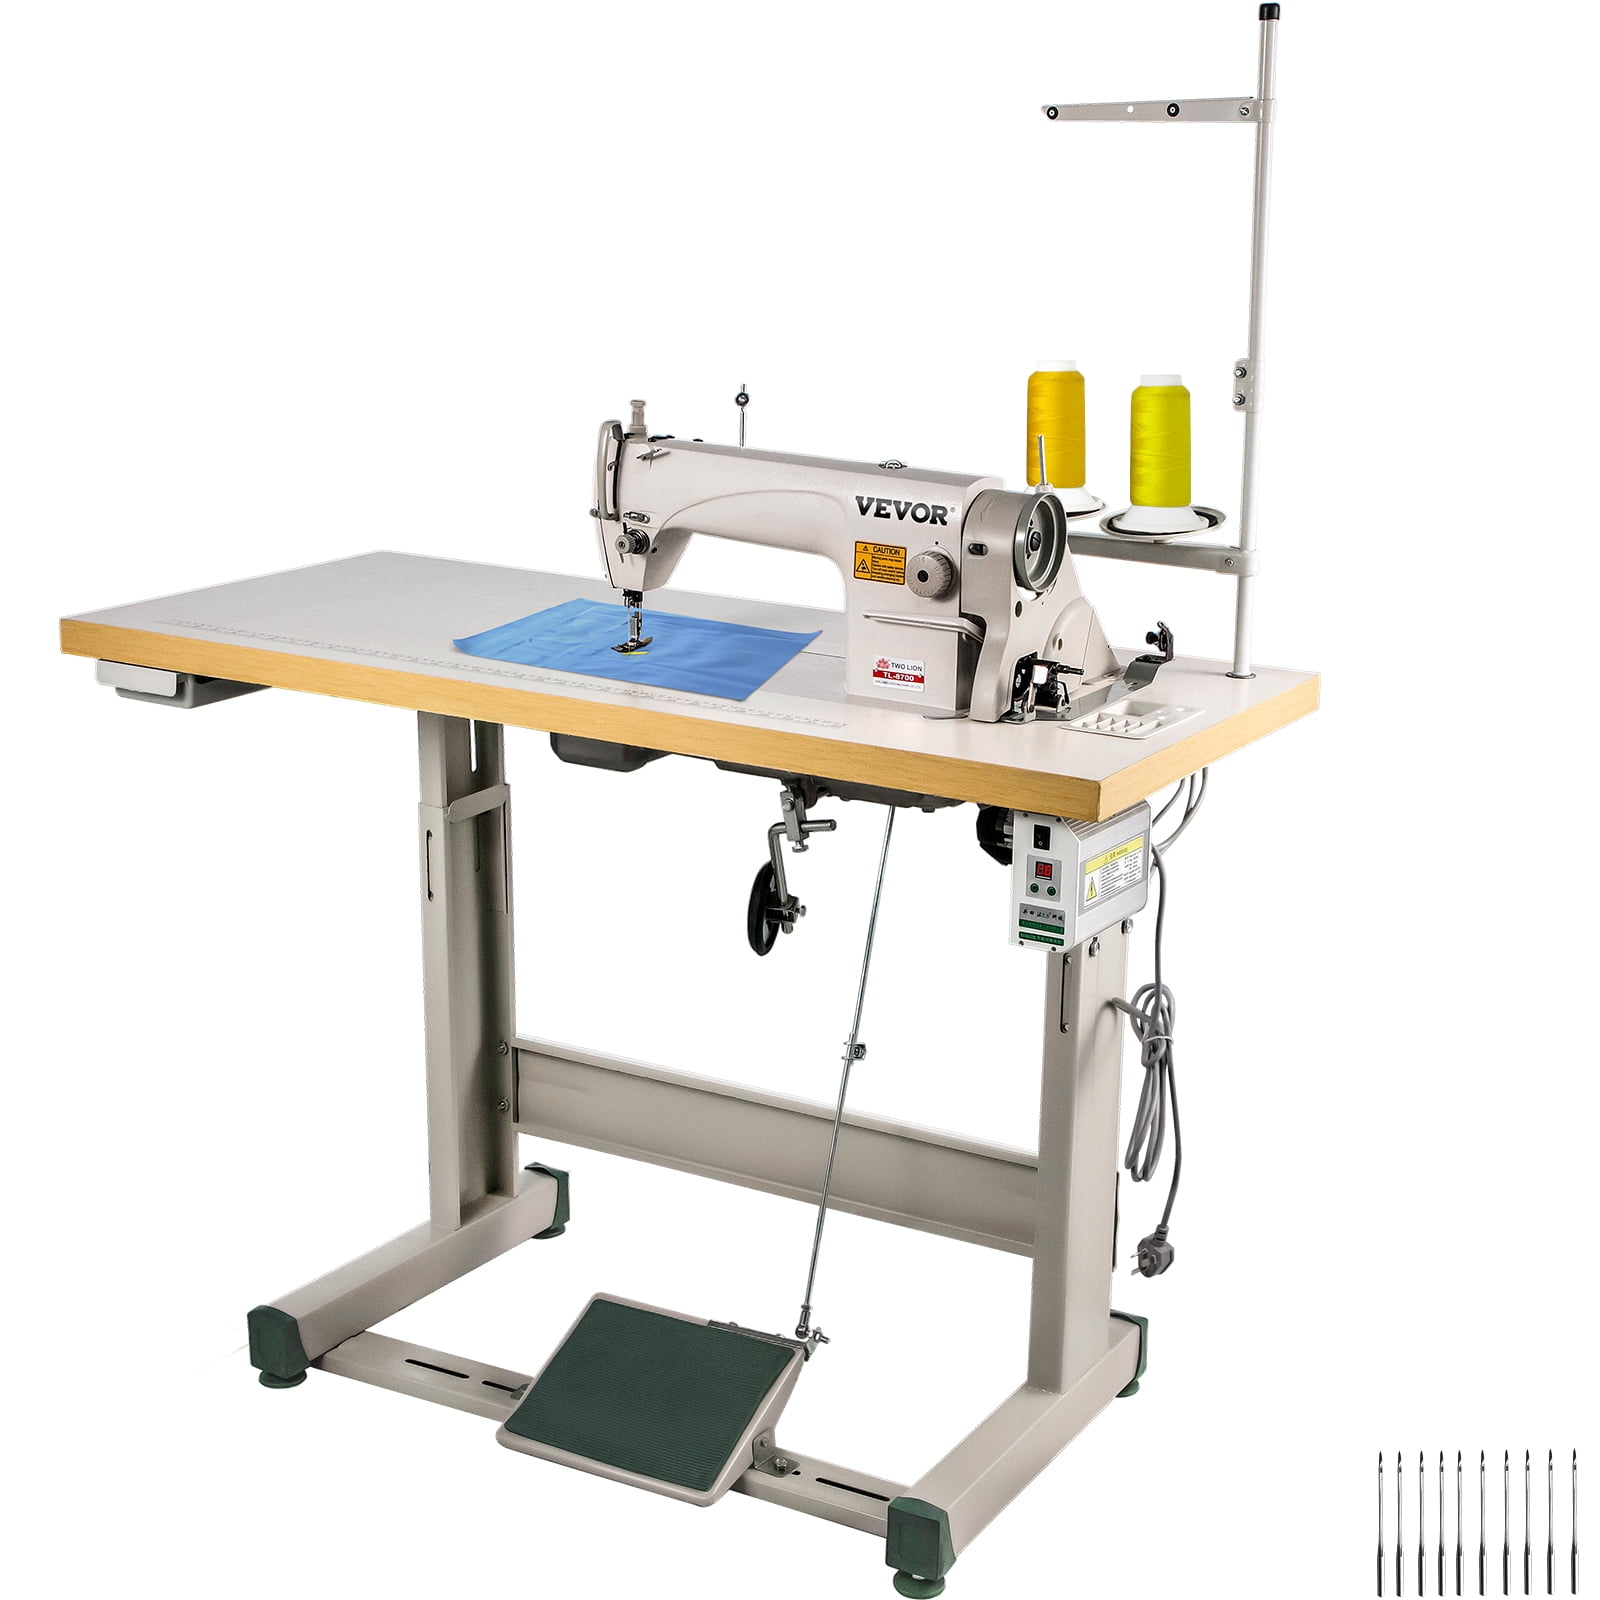 What Are the Features of an Industrial Sewing Machine?